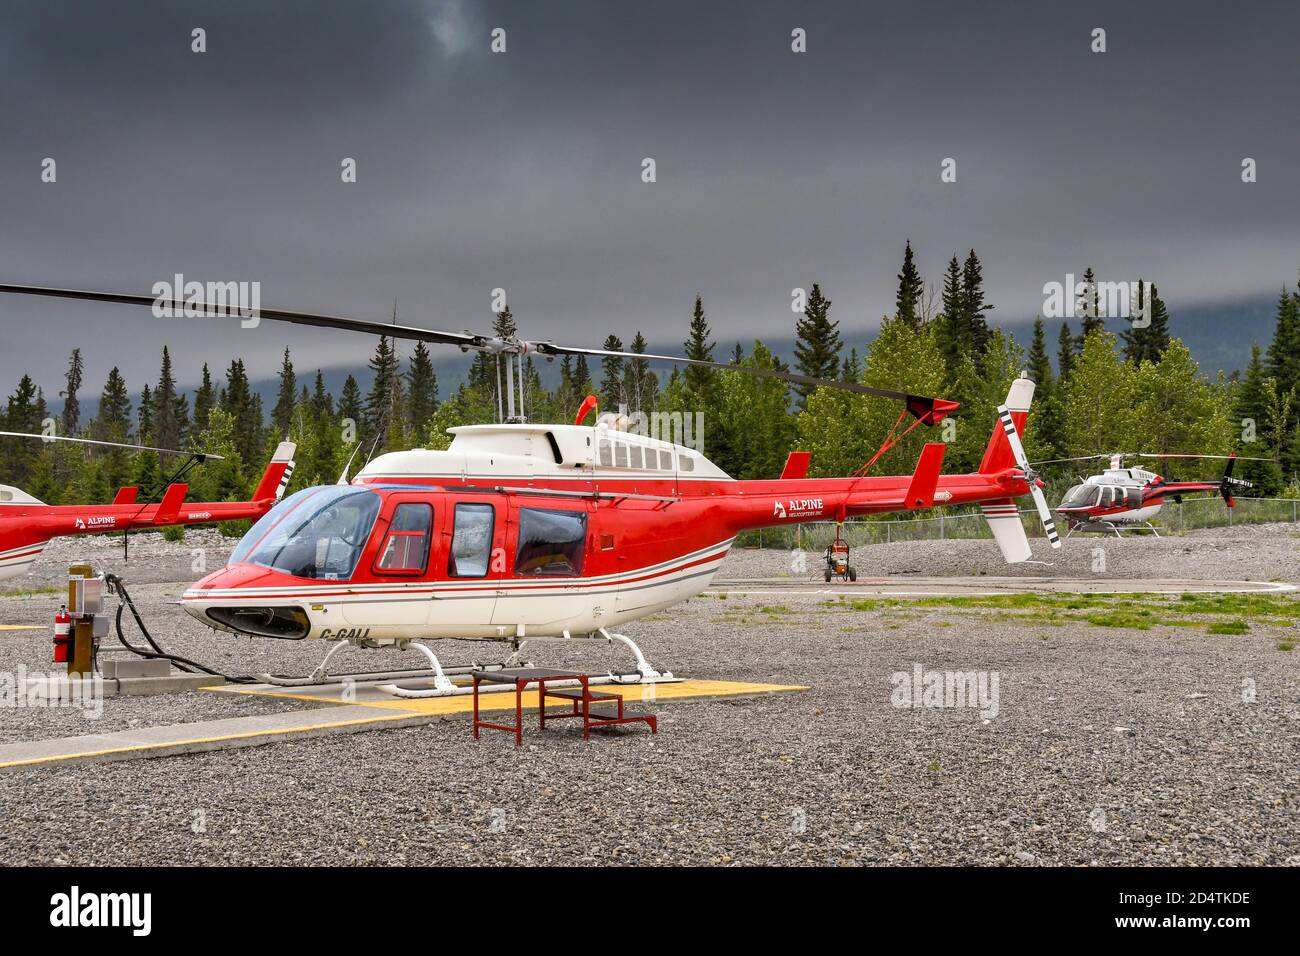 CANMORE, ALBERTA, CANADA - JUNE 2018: Helicopters lined up at the base of Alpine Helicopters in Canmore. Stock Photo